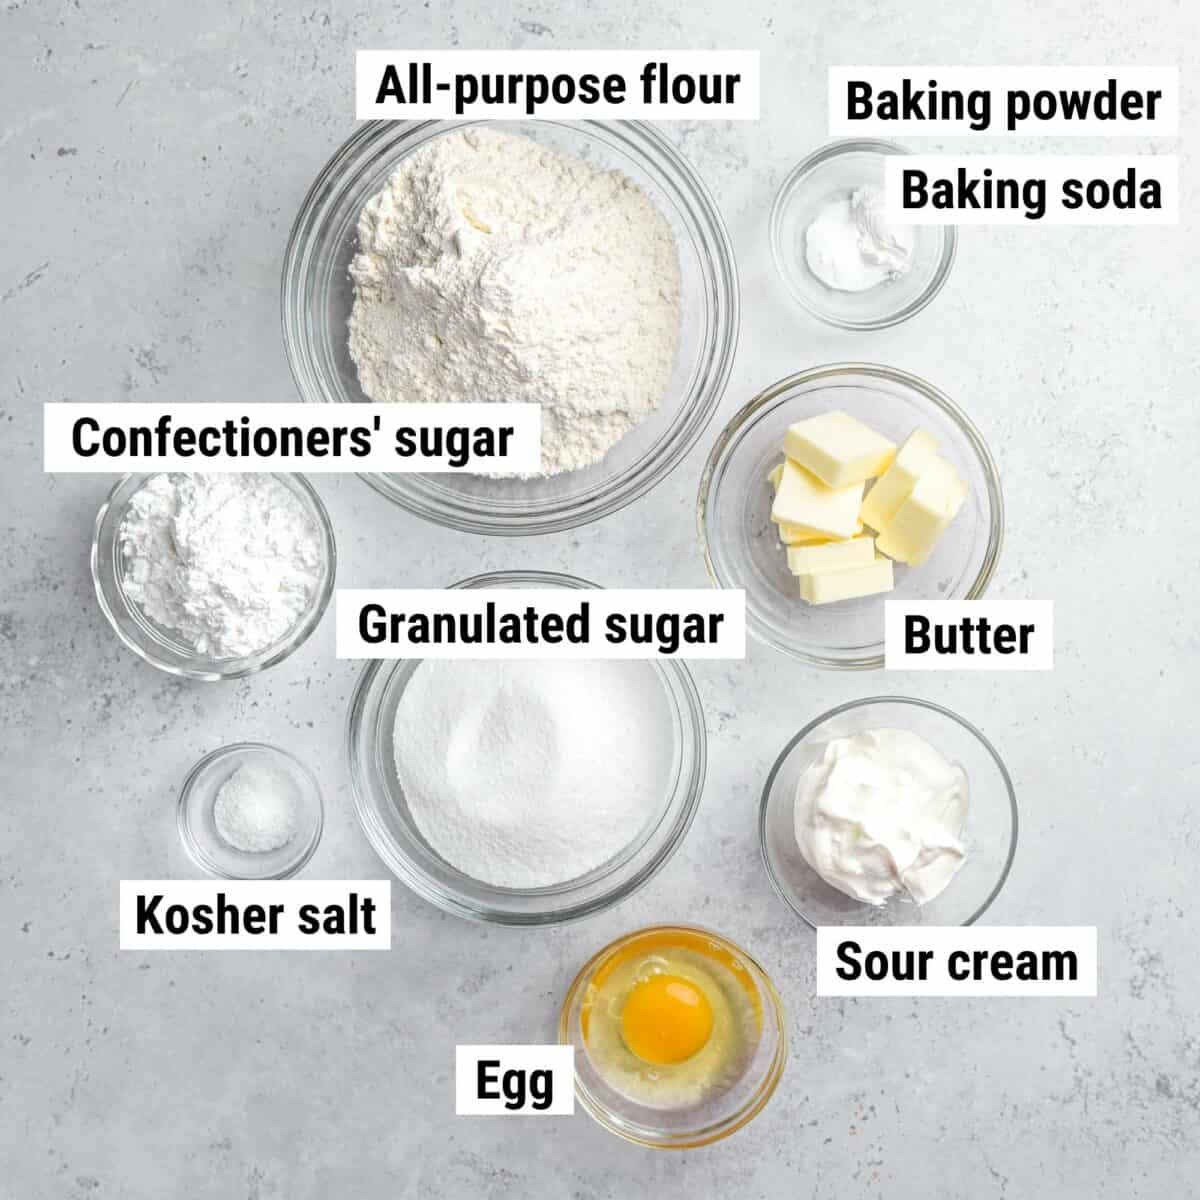 The ingredients used to make sour cream cookies laid out on a table.